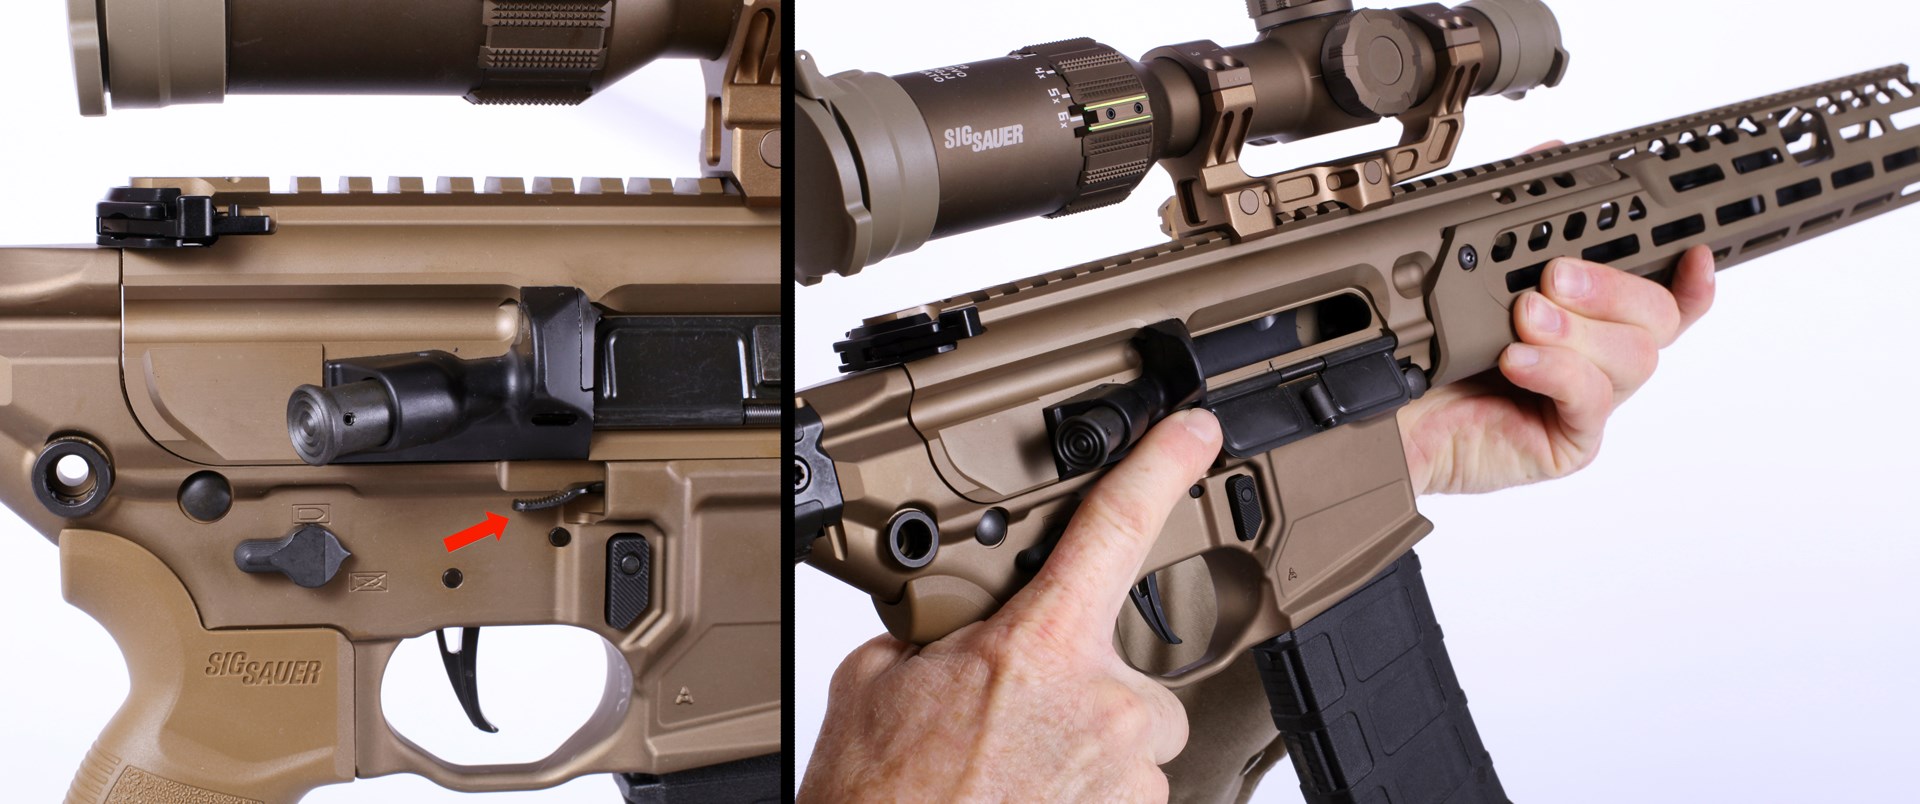 sig sauer mcx spear lt controls rifle detail how to finger placement demonstration gun rifle carbine right side safety